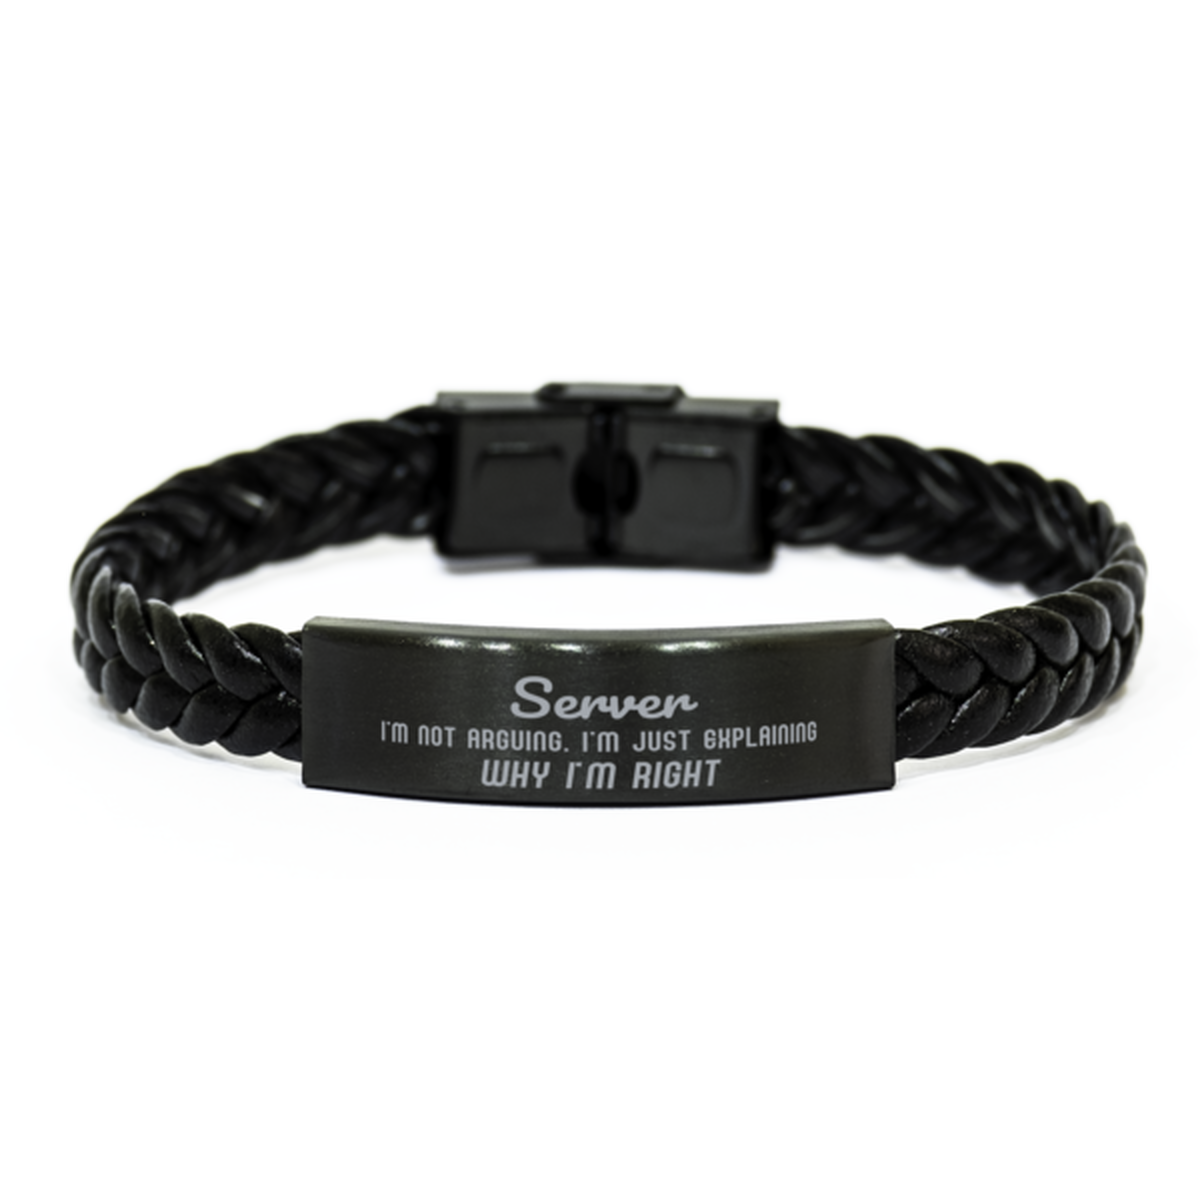 Server I'm not Arguing. I'm Just Explaining Why I'm RIGHT Braided Leather Bracelet, Graduation Birthday Christmas Server Gifts For Server Funny Saying Quote Present for Men Women Coworker